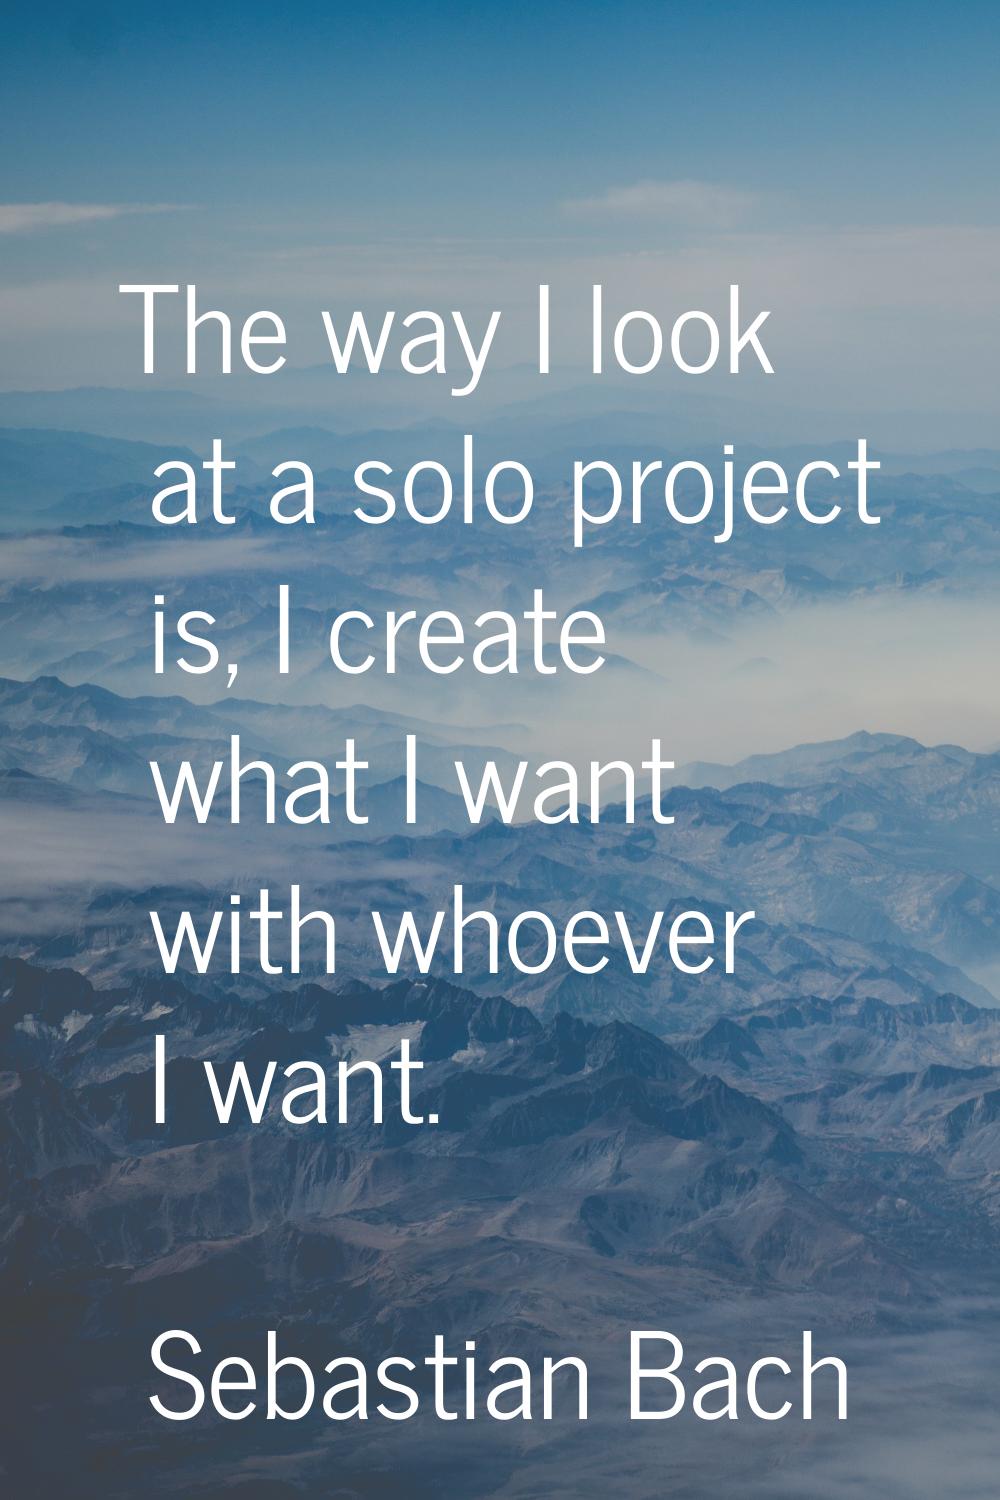 The way I look at a solo project is, I create what I want with whoever I want.